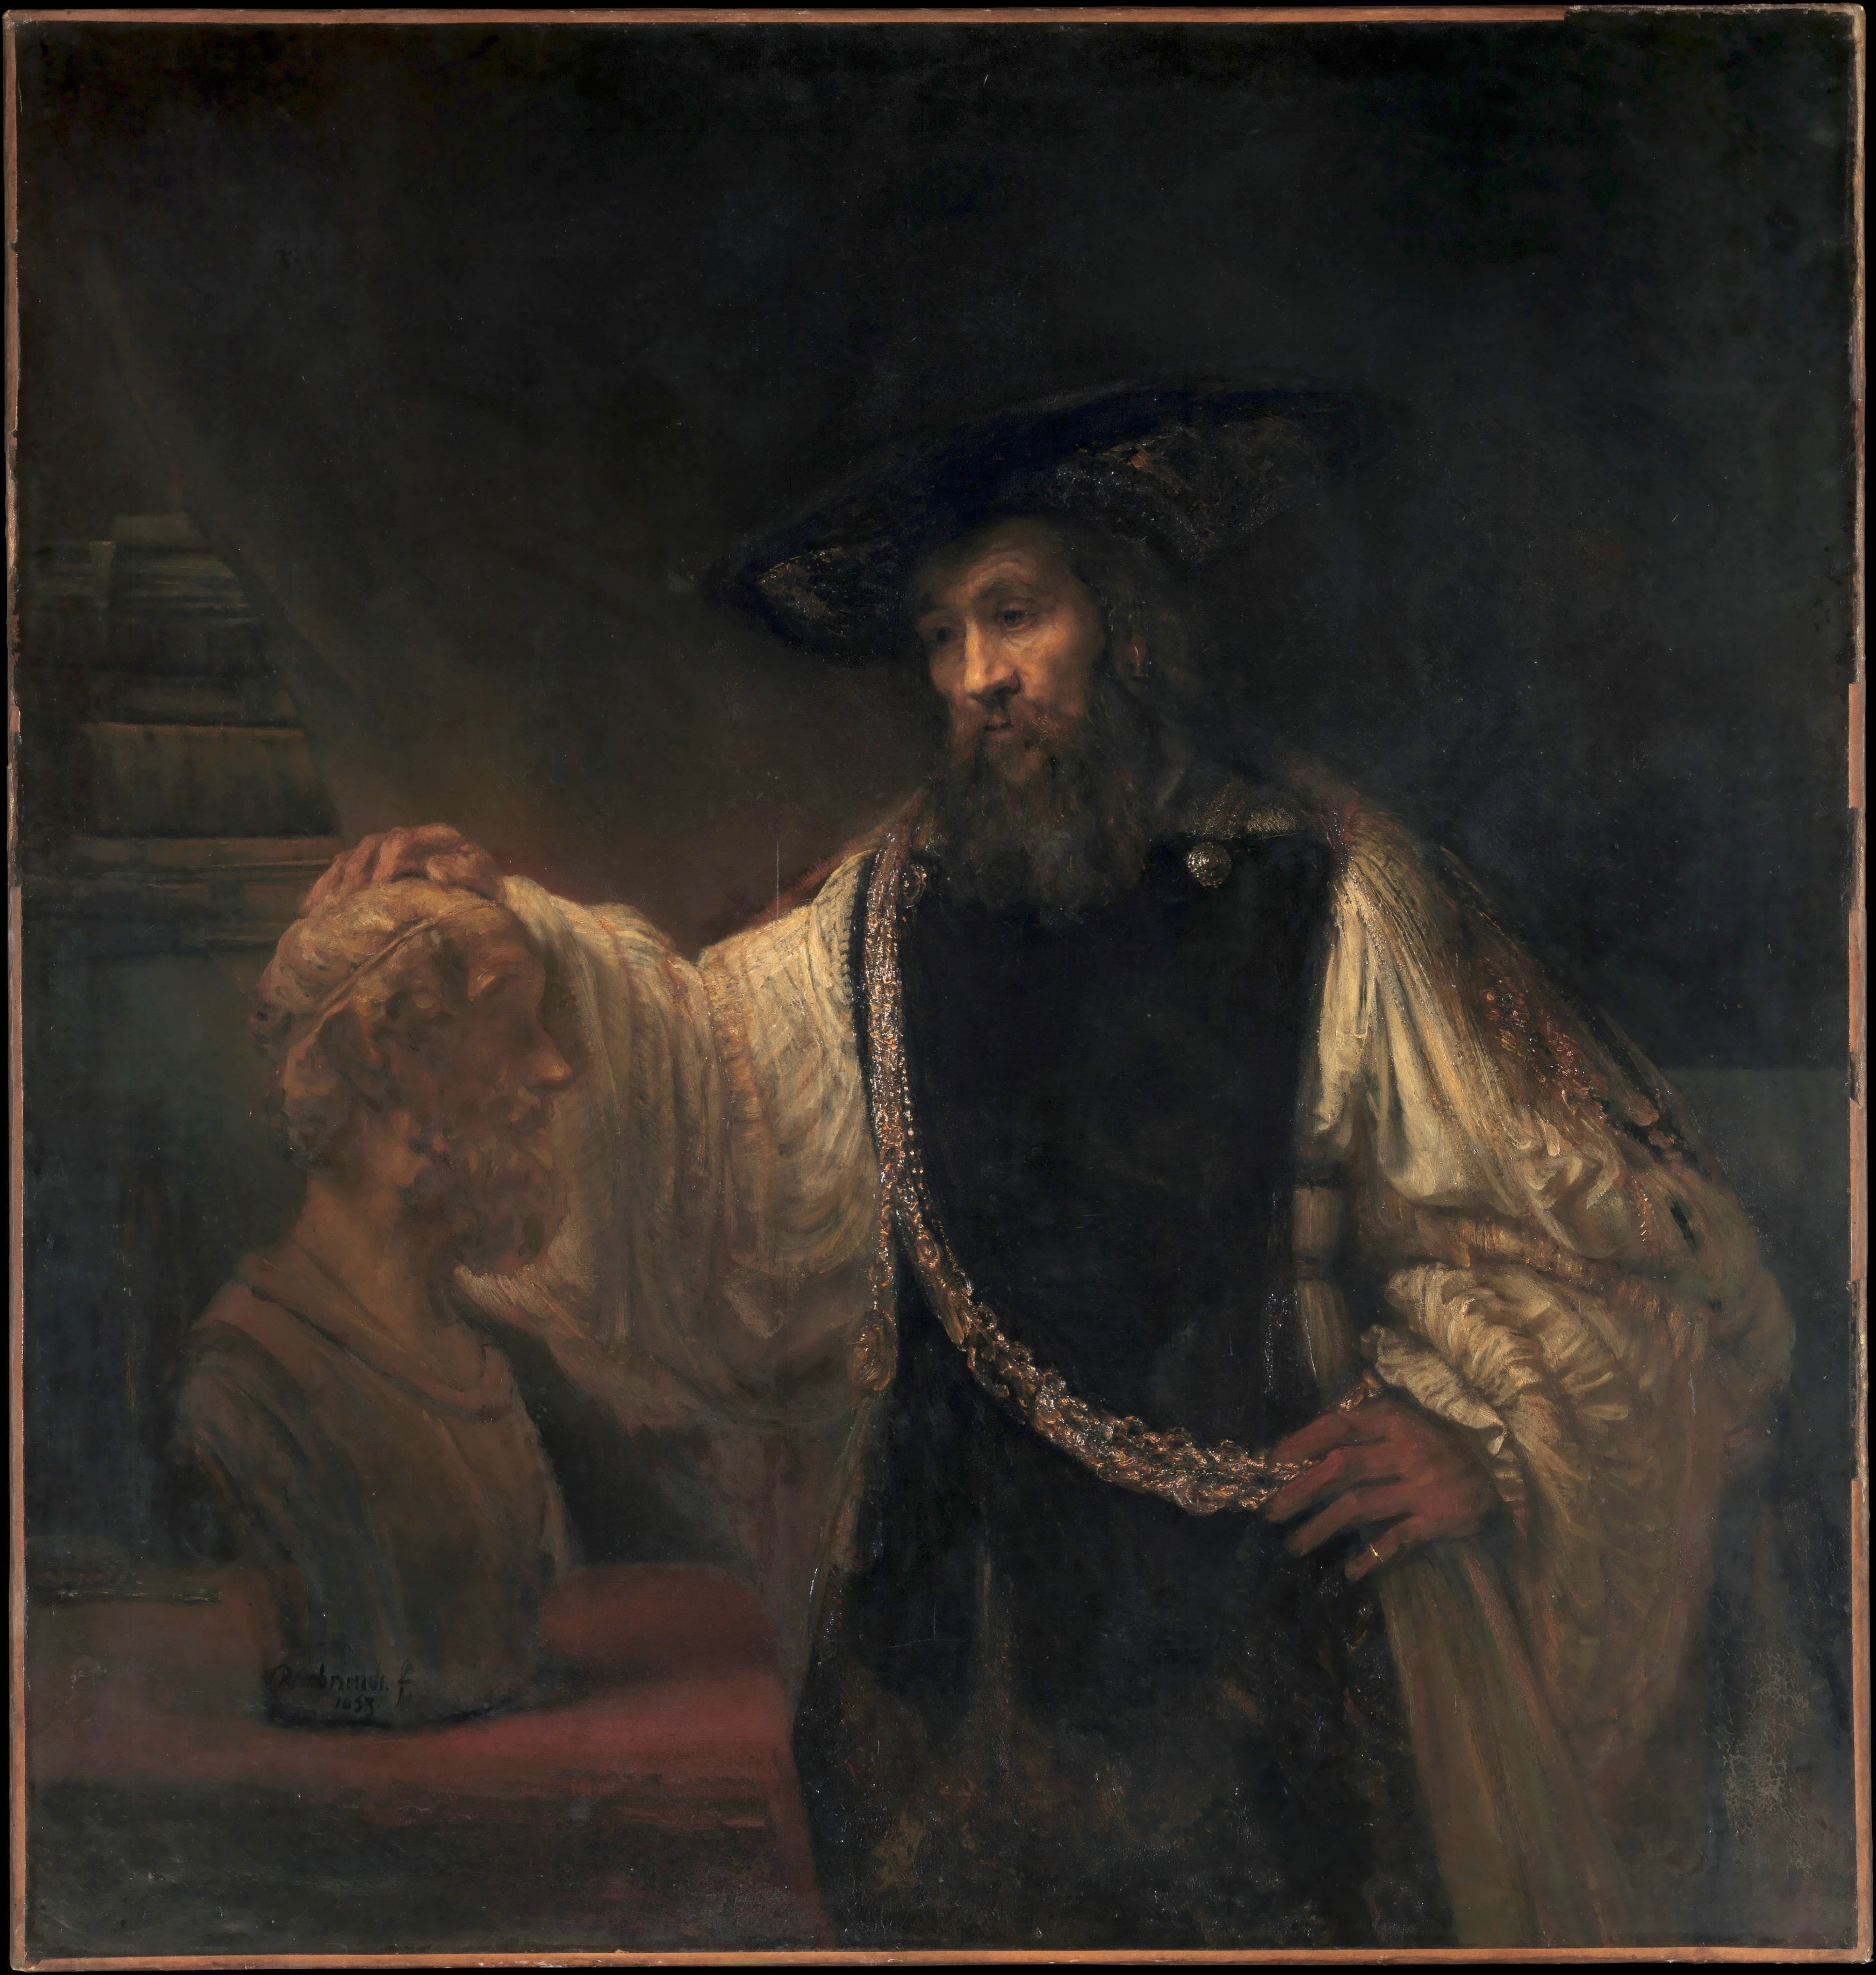 Rembrandt's 'Aristotle Contemplating a Bust of Homer' becomes a window into far-off times and places in 'The Guard.'